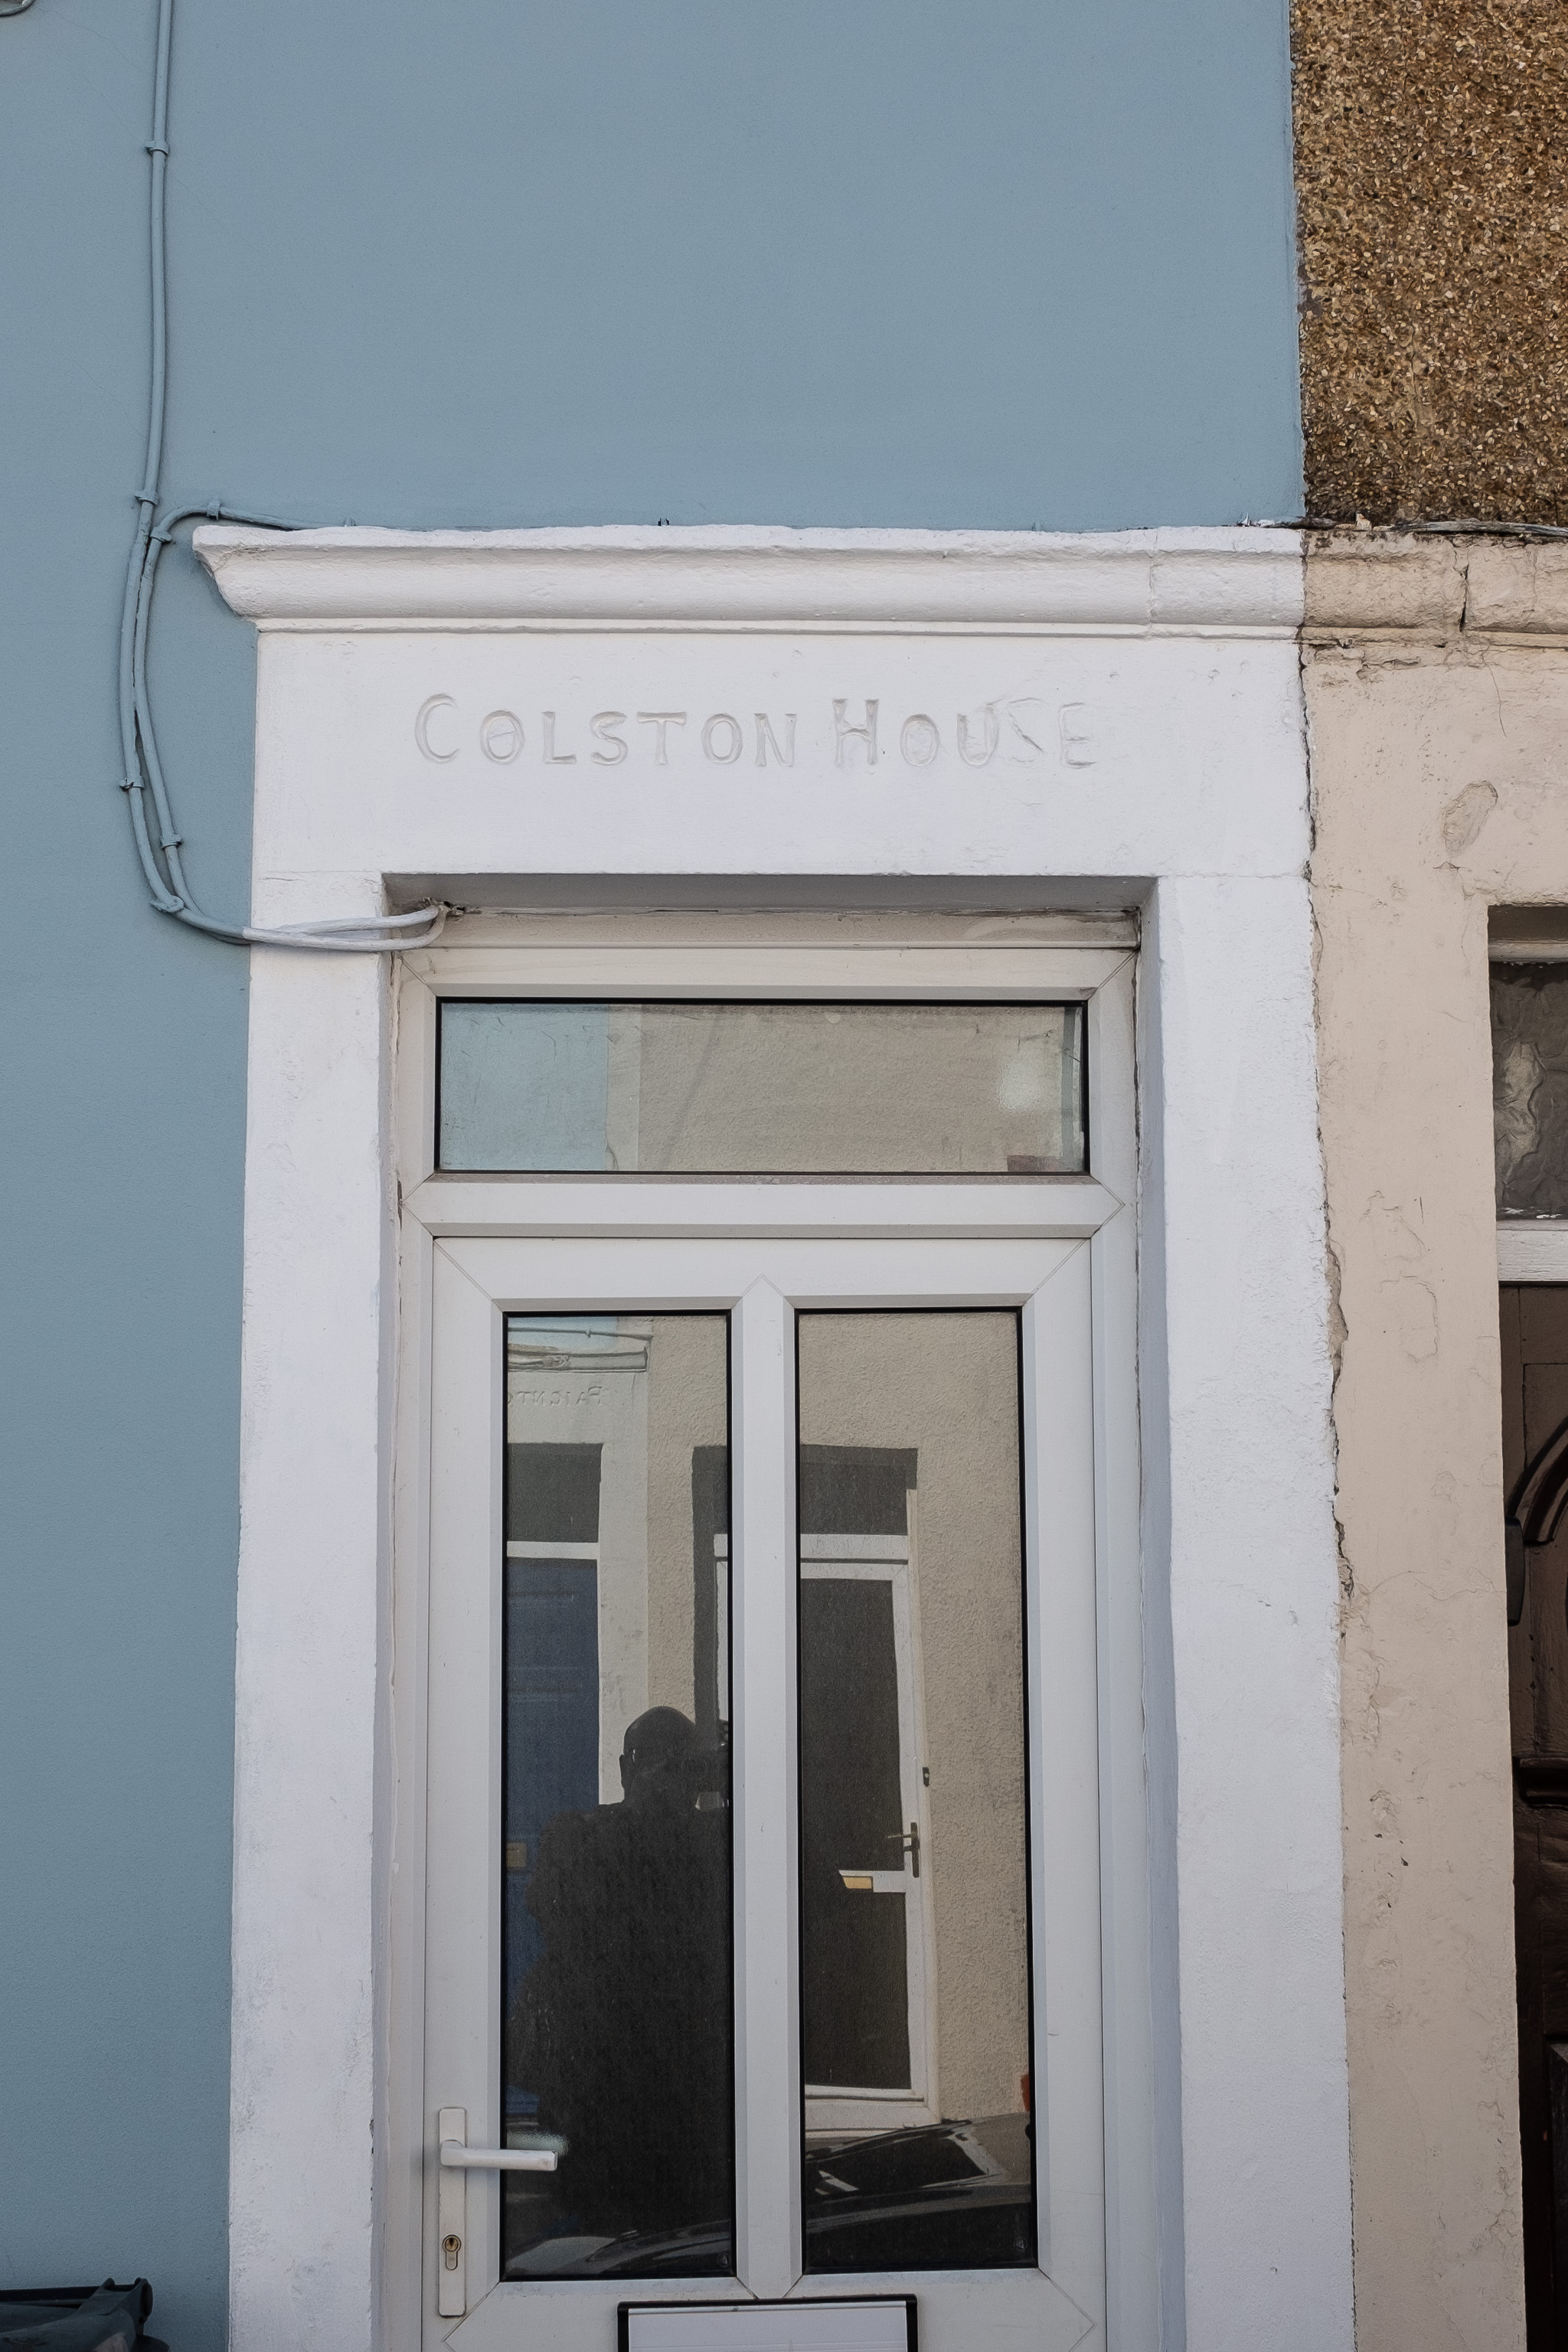 Colston House
I wonder if the owners might find a stonemason to change it to Beacon House.
